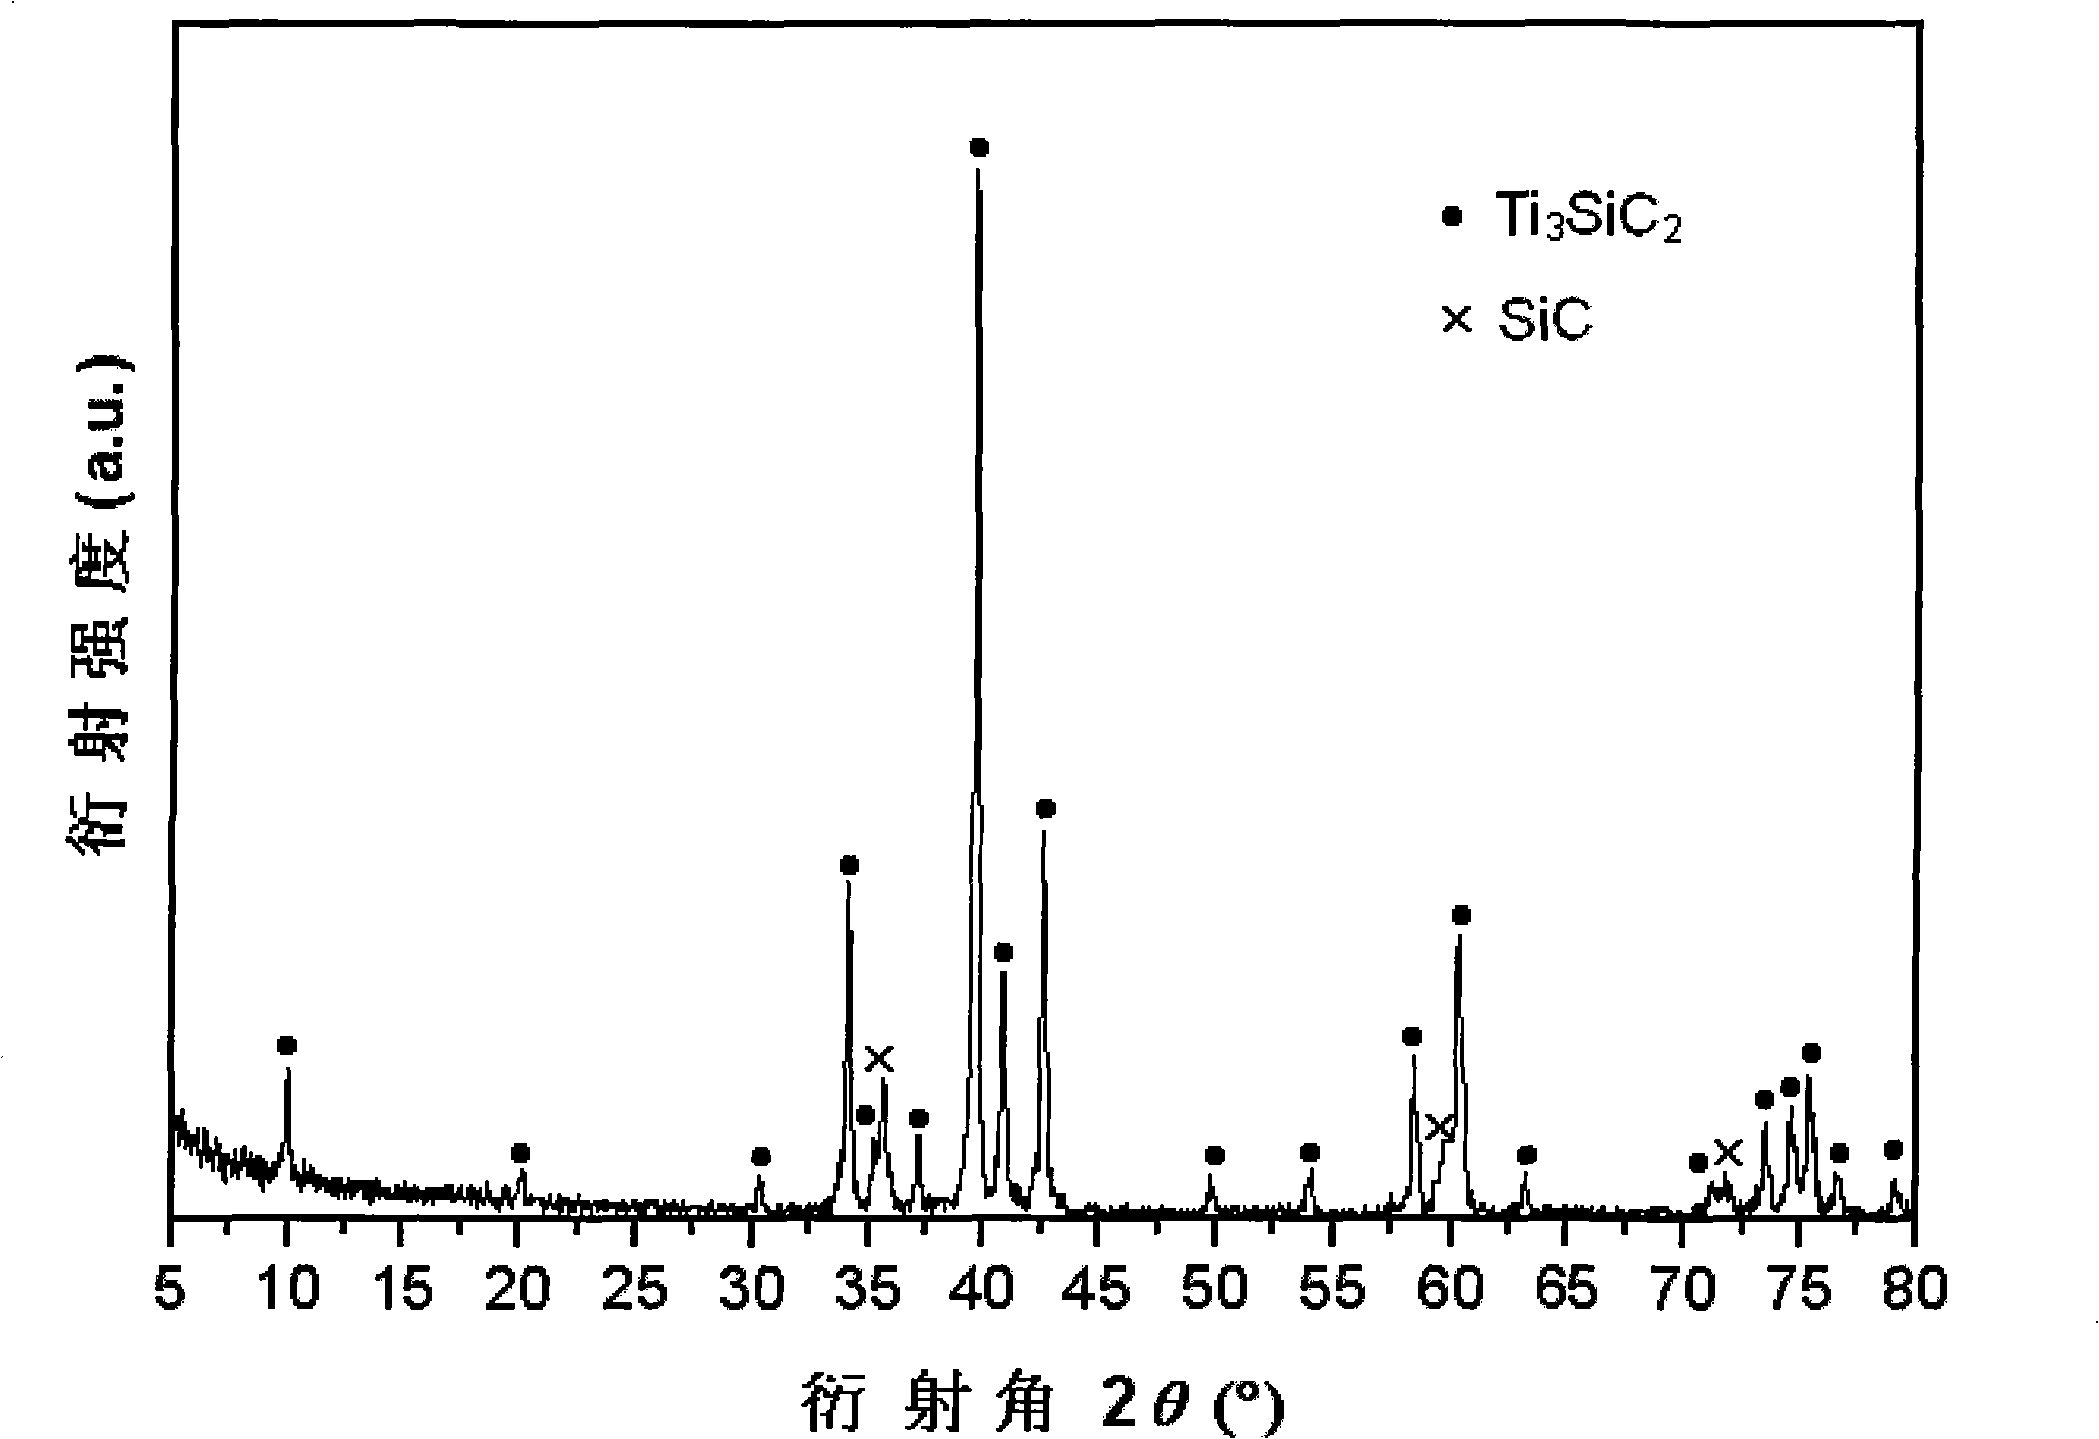 Method for preparing SiC/Ti3SiC2 with substitution reaction hot press in situ